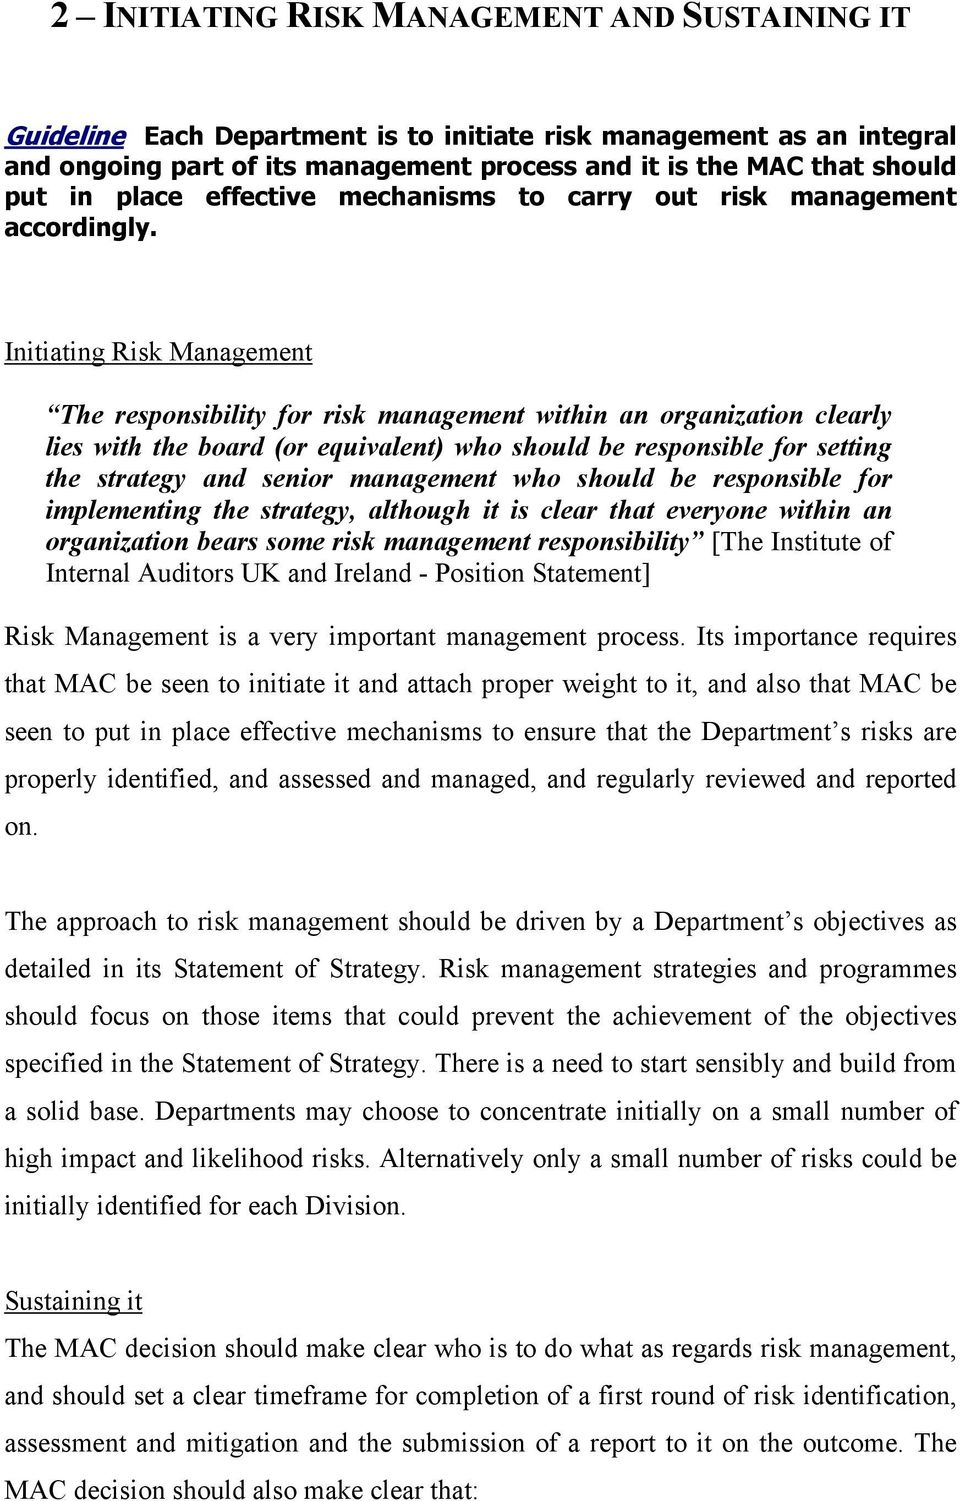 Initiating Risk Management The responsibility for risk management within an organization clearly lies with the board (or equivalent) who should be responsible for setting the strategy and senior